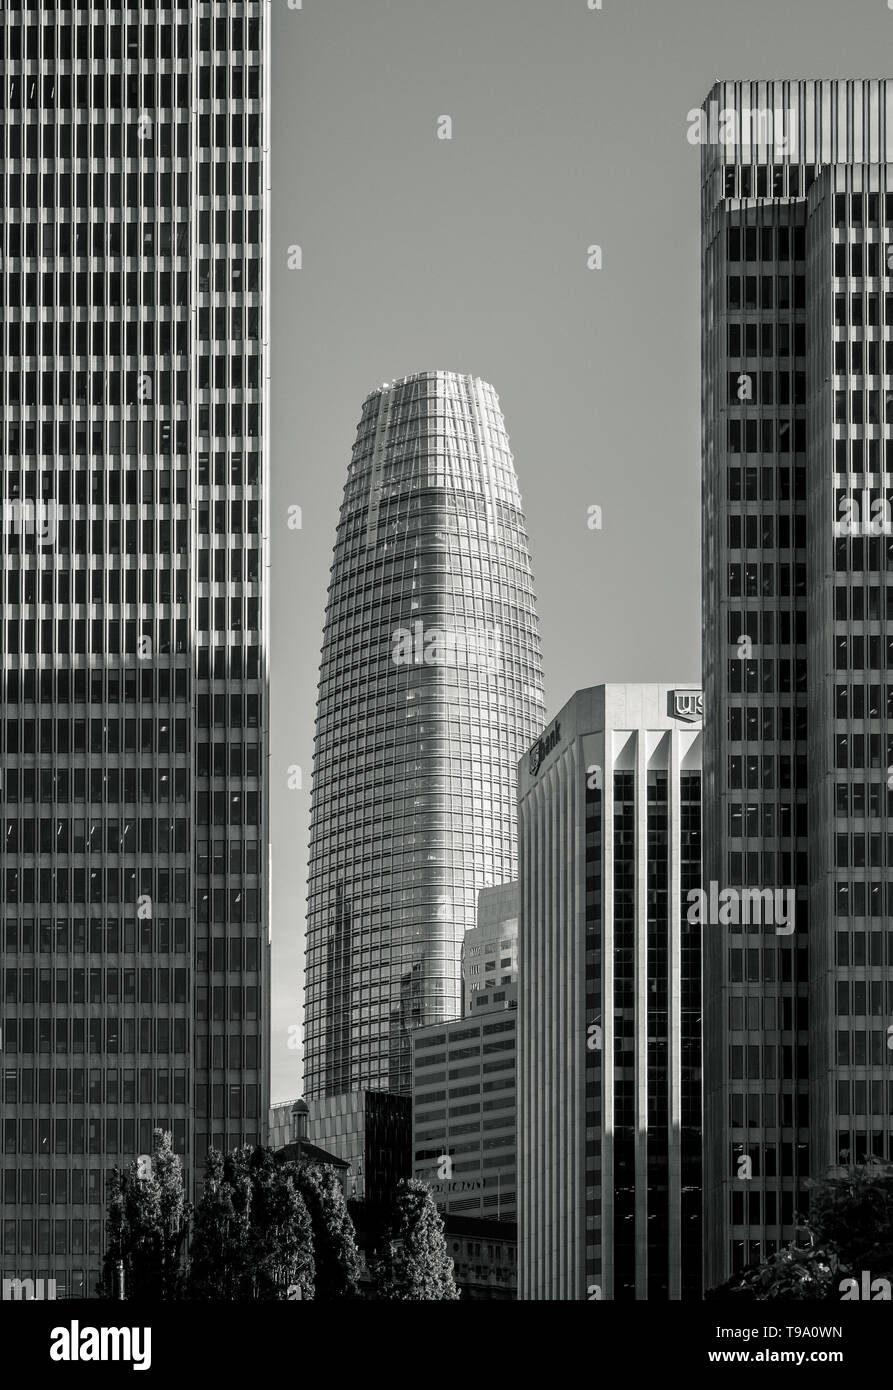 04-24-2019. United States of America. Salesforce Tower between other skyscrapers in San Francisco, California. Stock Photo